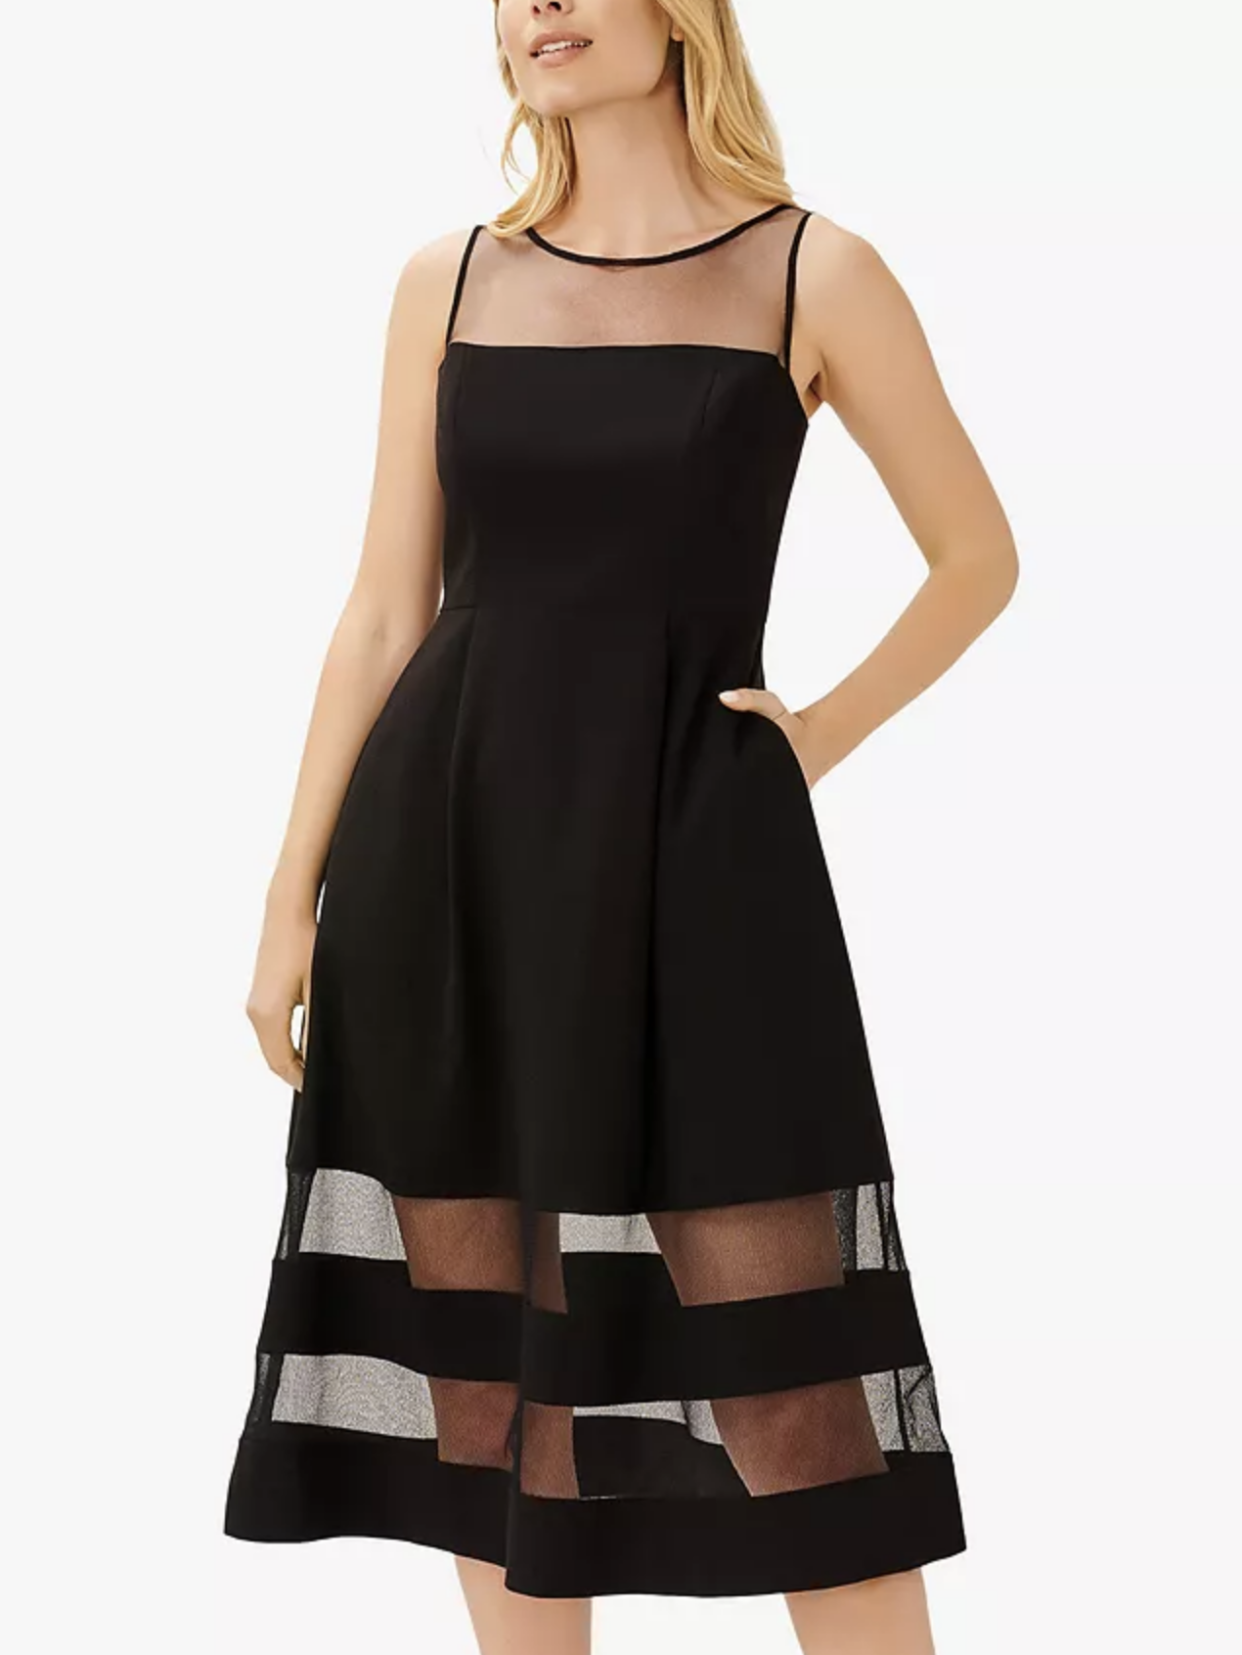 The perfect Adrianna Papell midi for a cocktail party. (John Lewis)